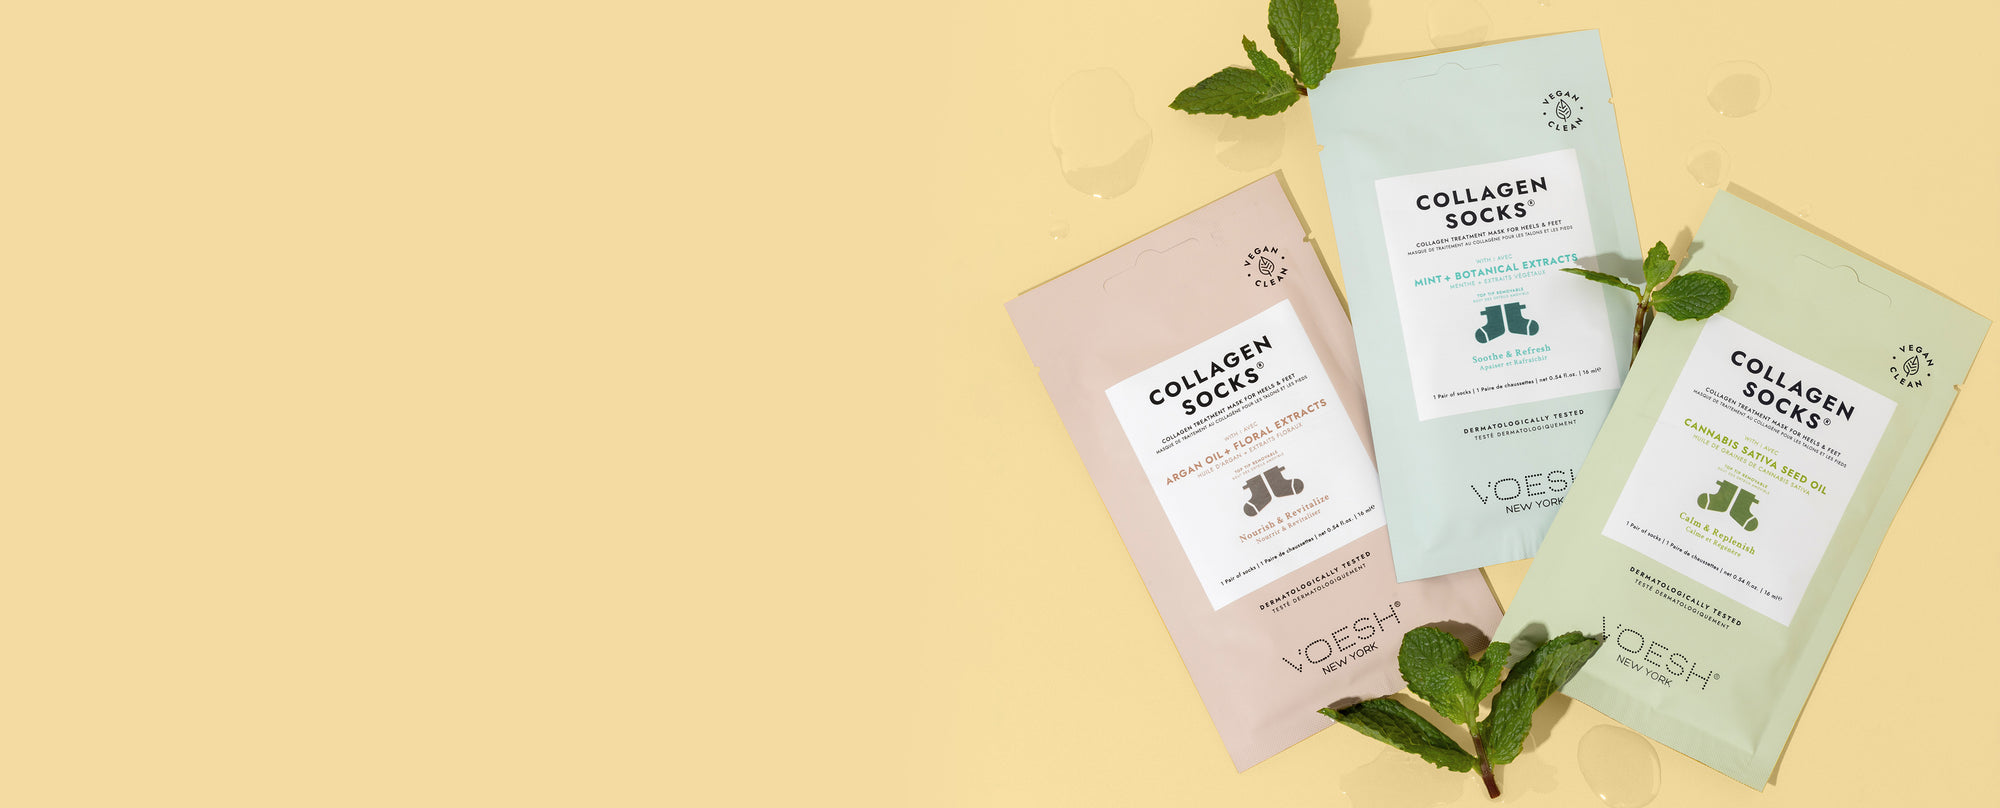 Collagen Socks Argan Oil + Floral Extracts, Collagen Socks Mint + Botanical Extracts, and Collagen Socks Cannabis Sativa Seed Oil on a yellow background with mint leaves. 